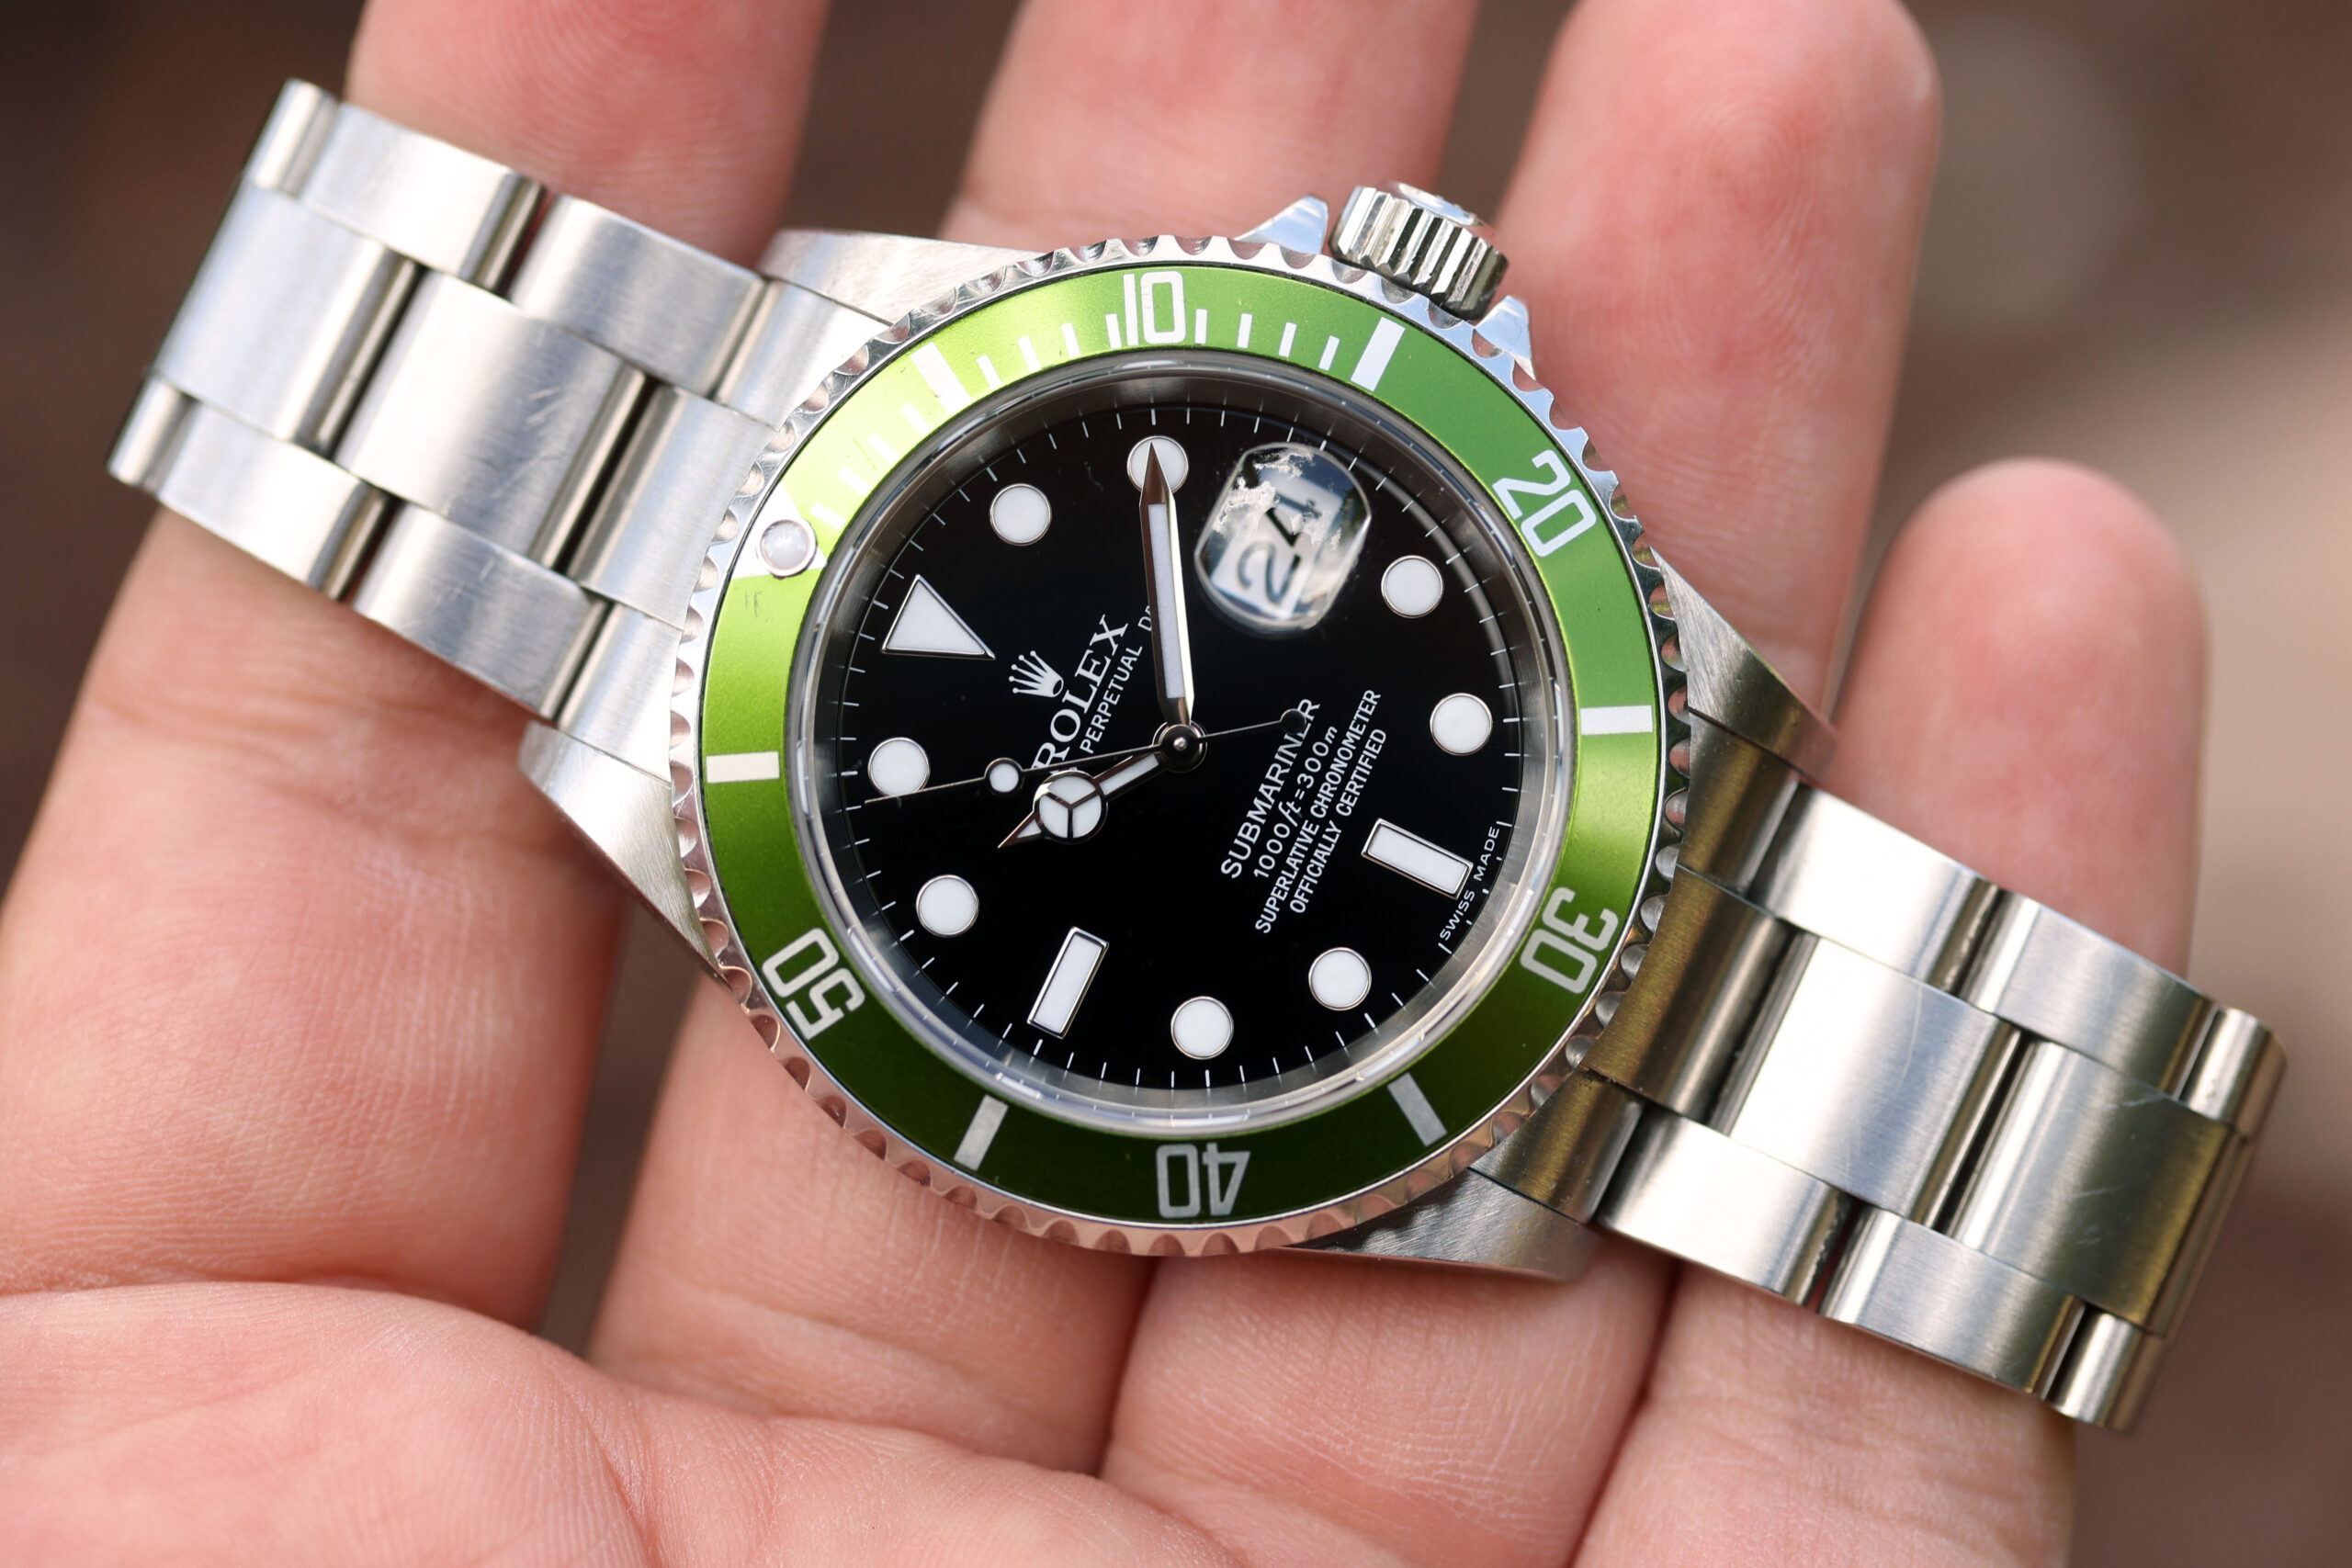 Rolex 16610LV Kermit Watch Review: Is It the Best Green Submariner